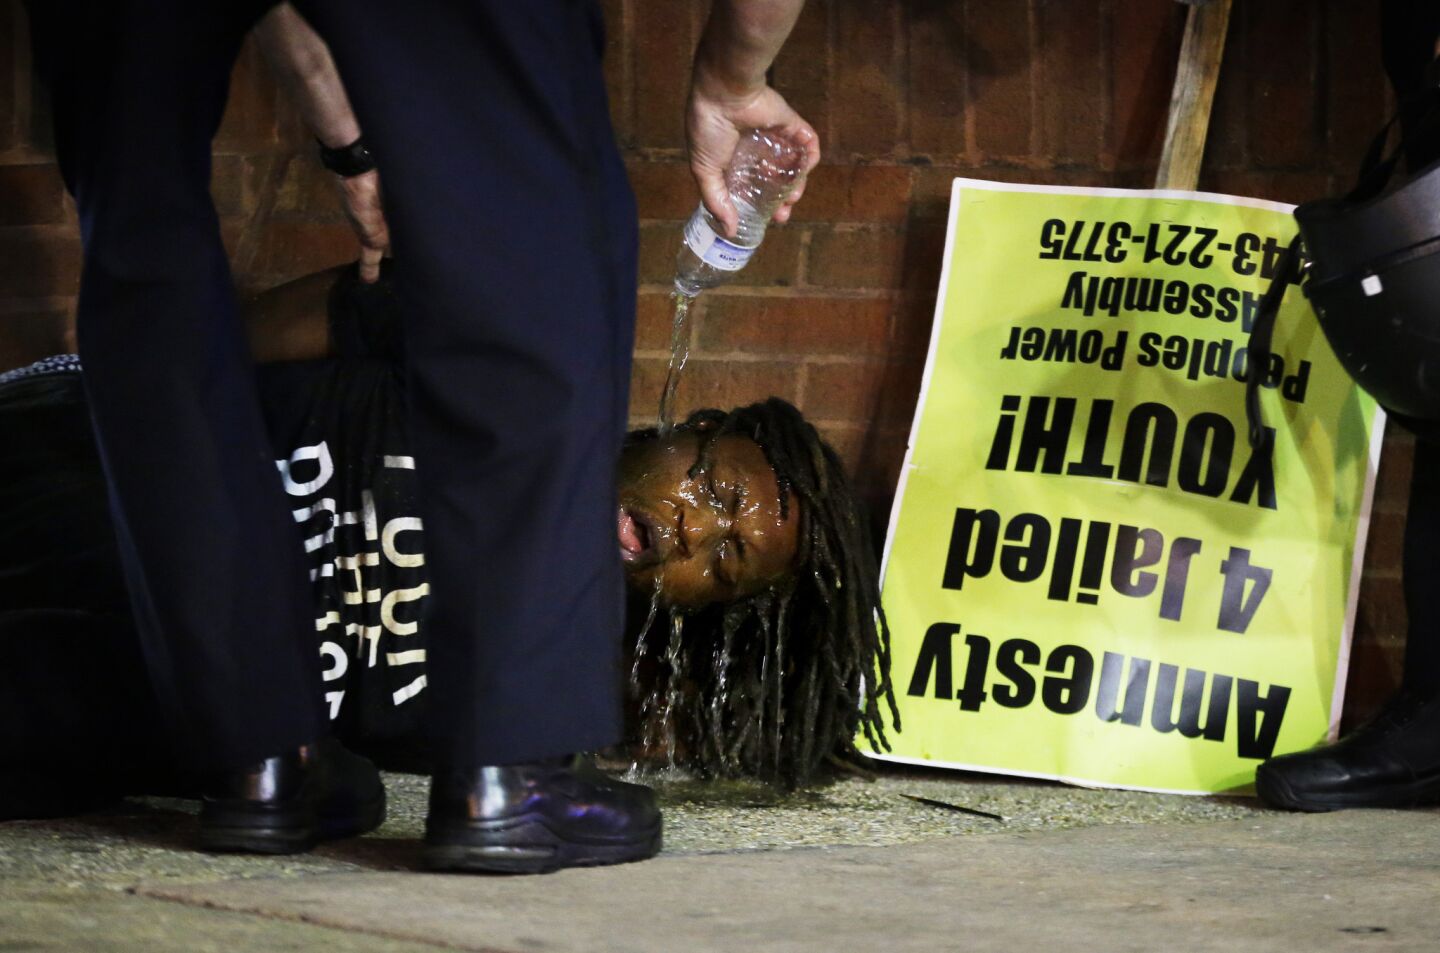 Police pour water over the face of a man after he was arrested and hit with pepper spray as police enforced a 10 p.m. curfew Saturday in Baltimore.